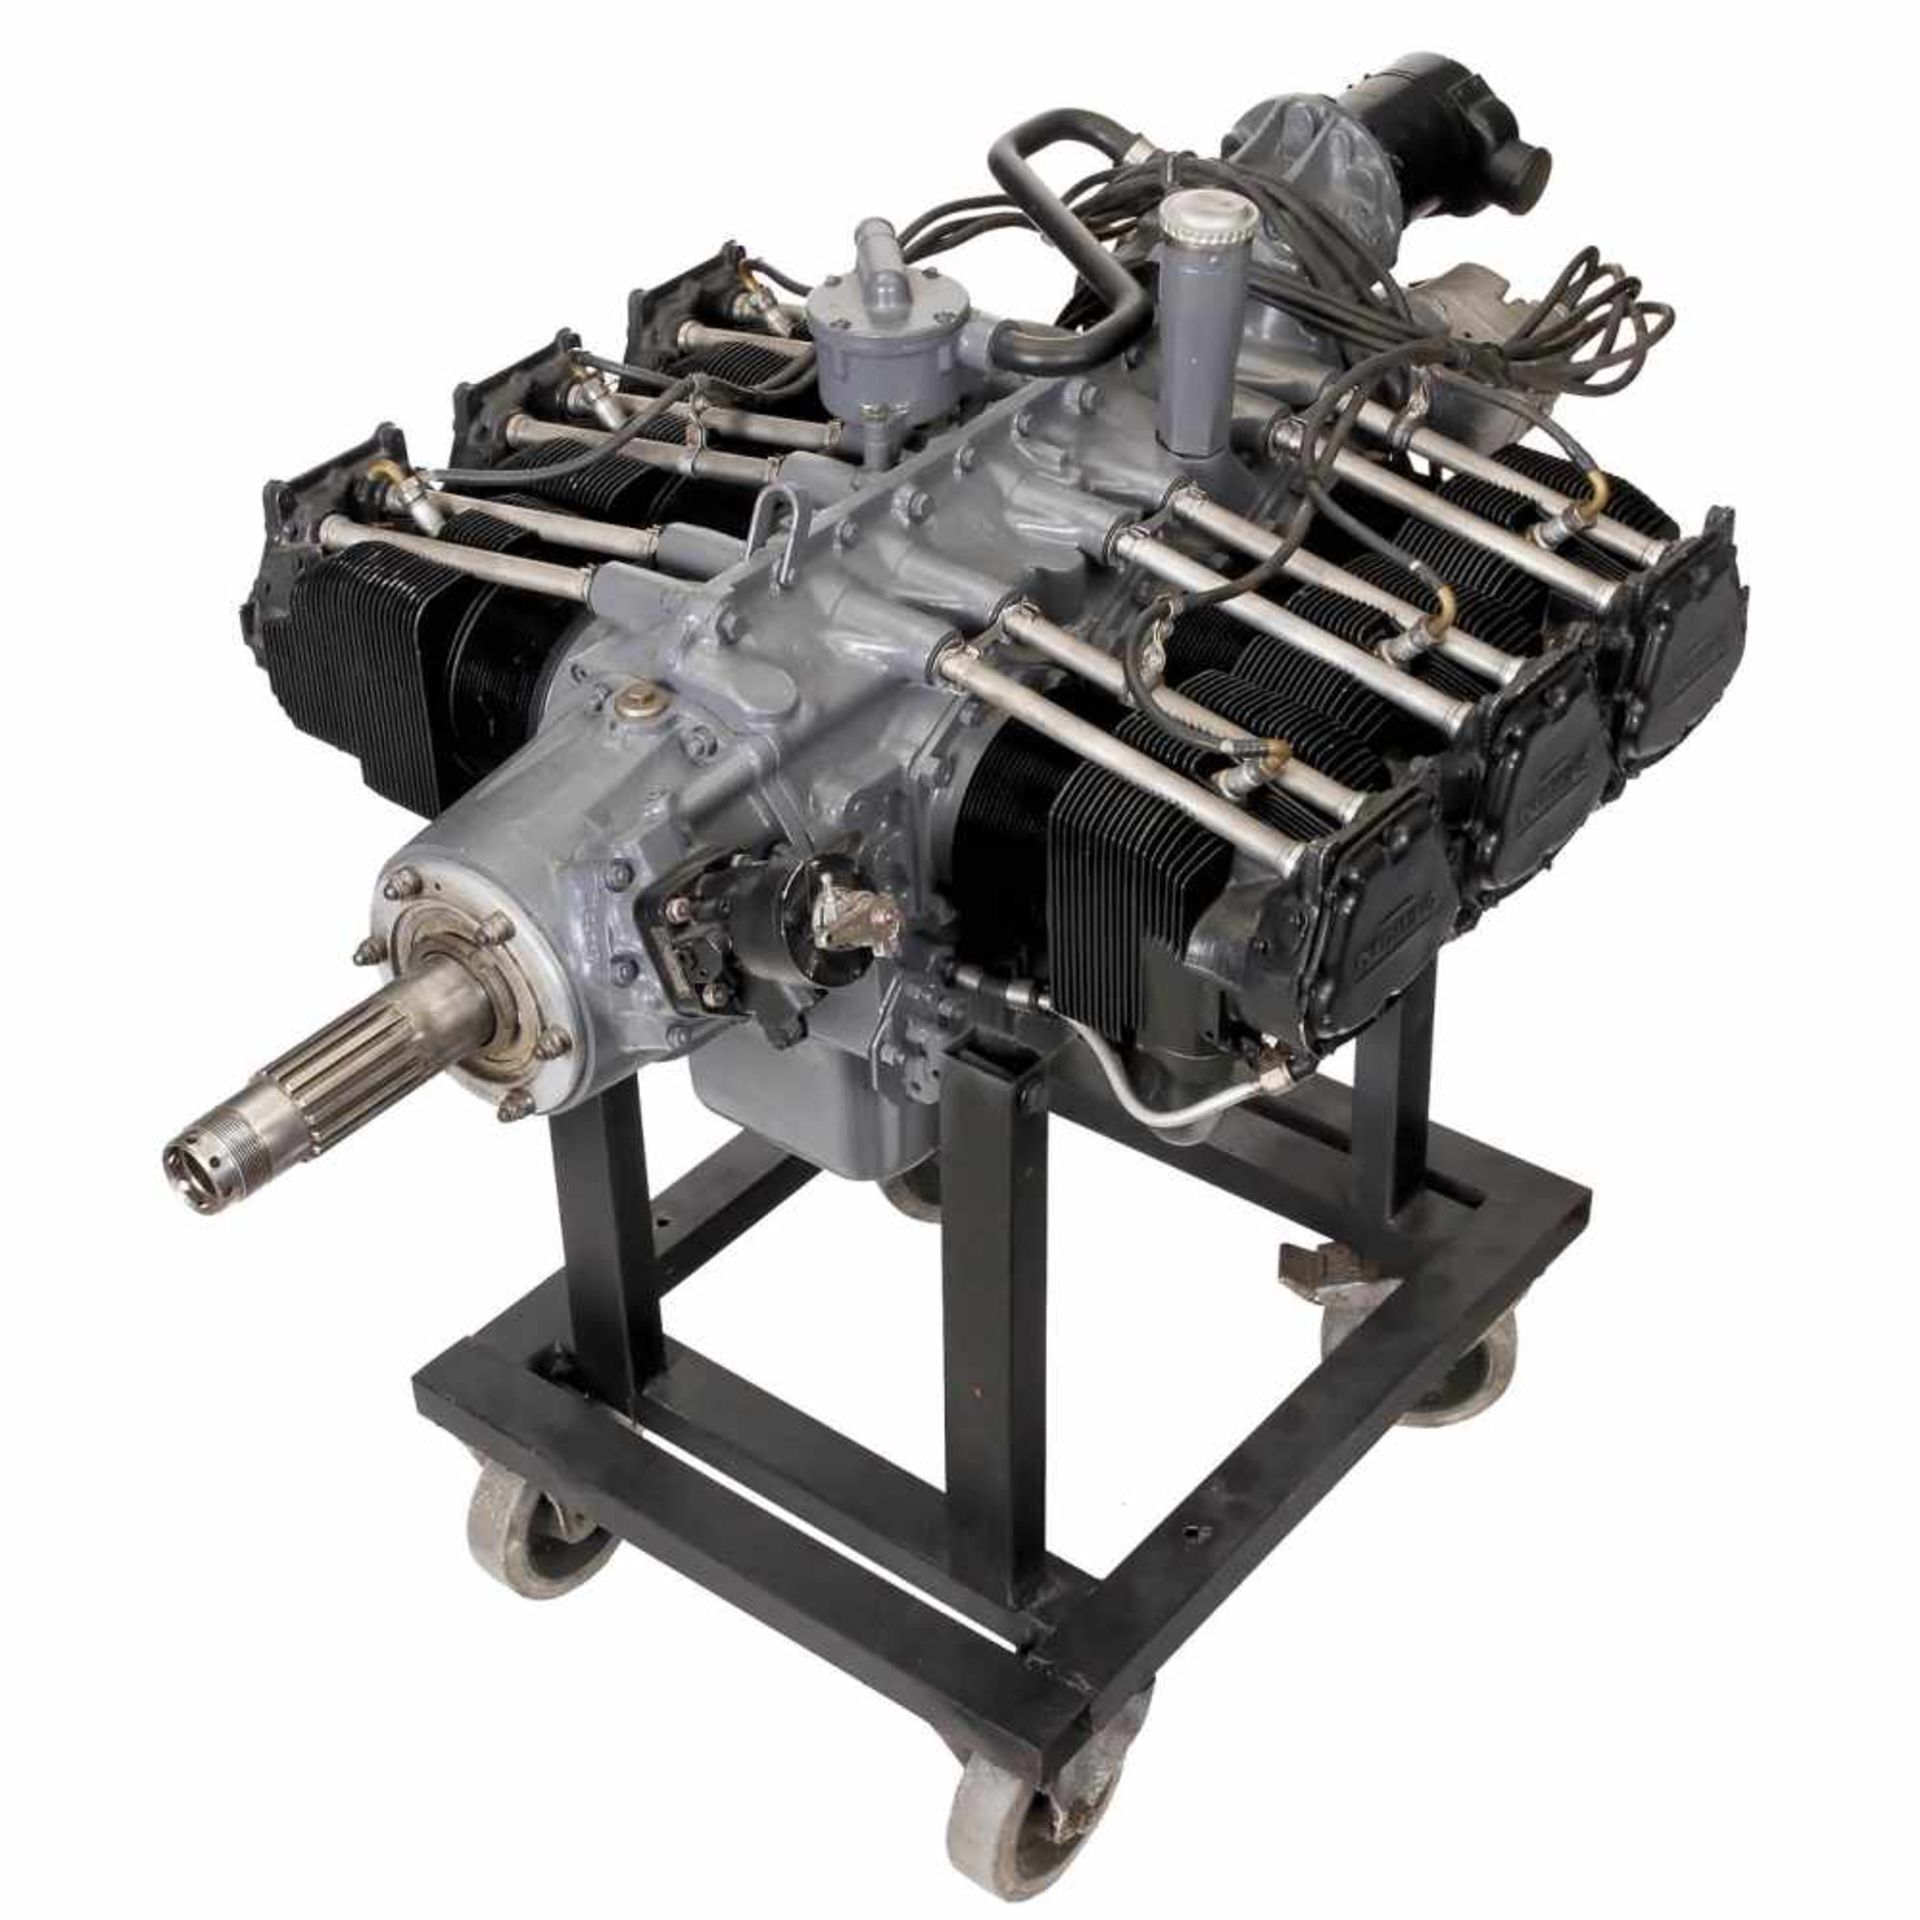 Lycoming Aviation Engine, 1954-78Model GO-480-81A6, manufactured by Lycoming Division, USA. Six-